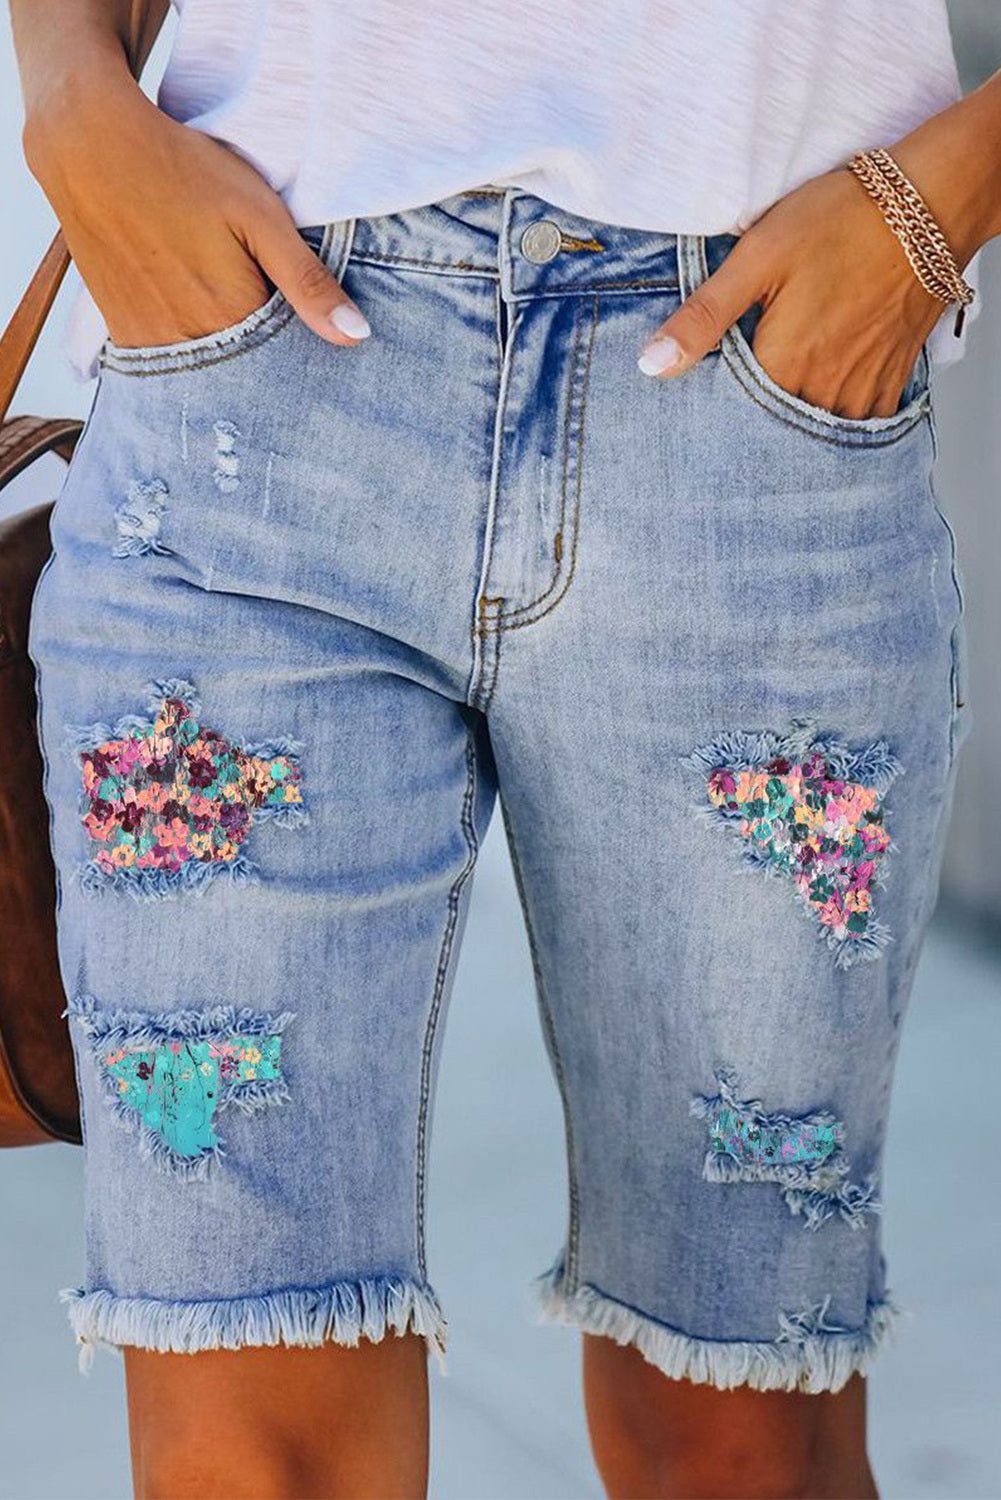 Distressed Jean Shorts Outfit
  Ideas for Women